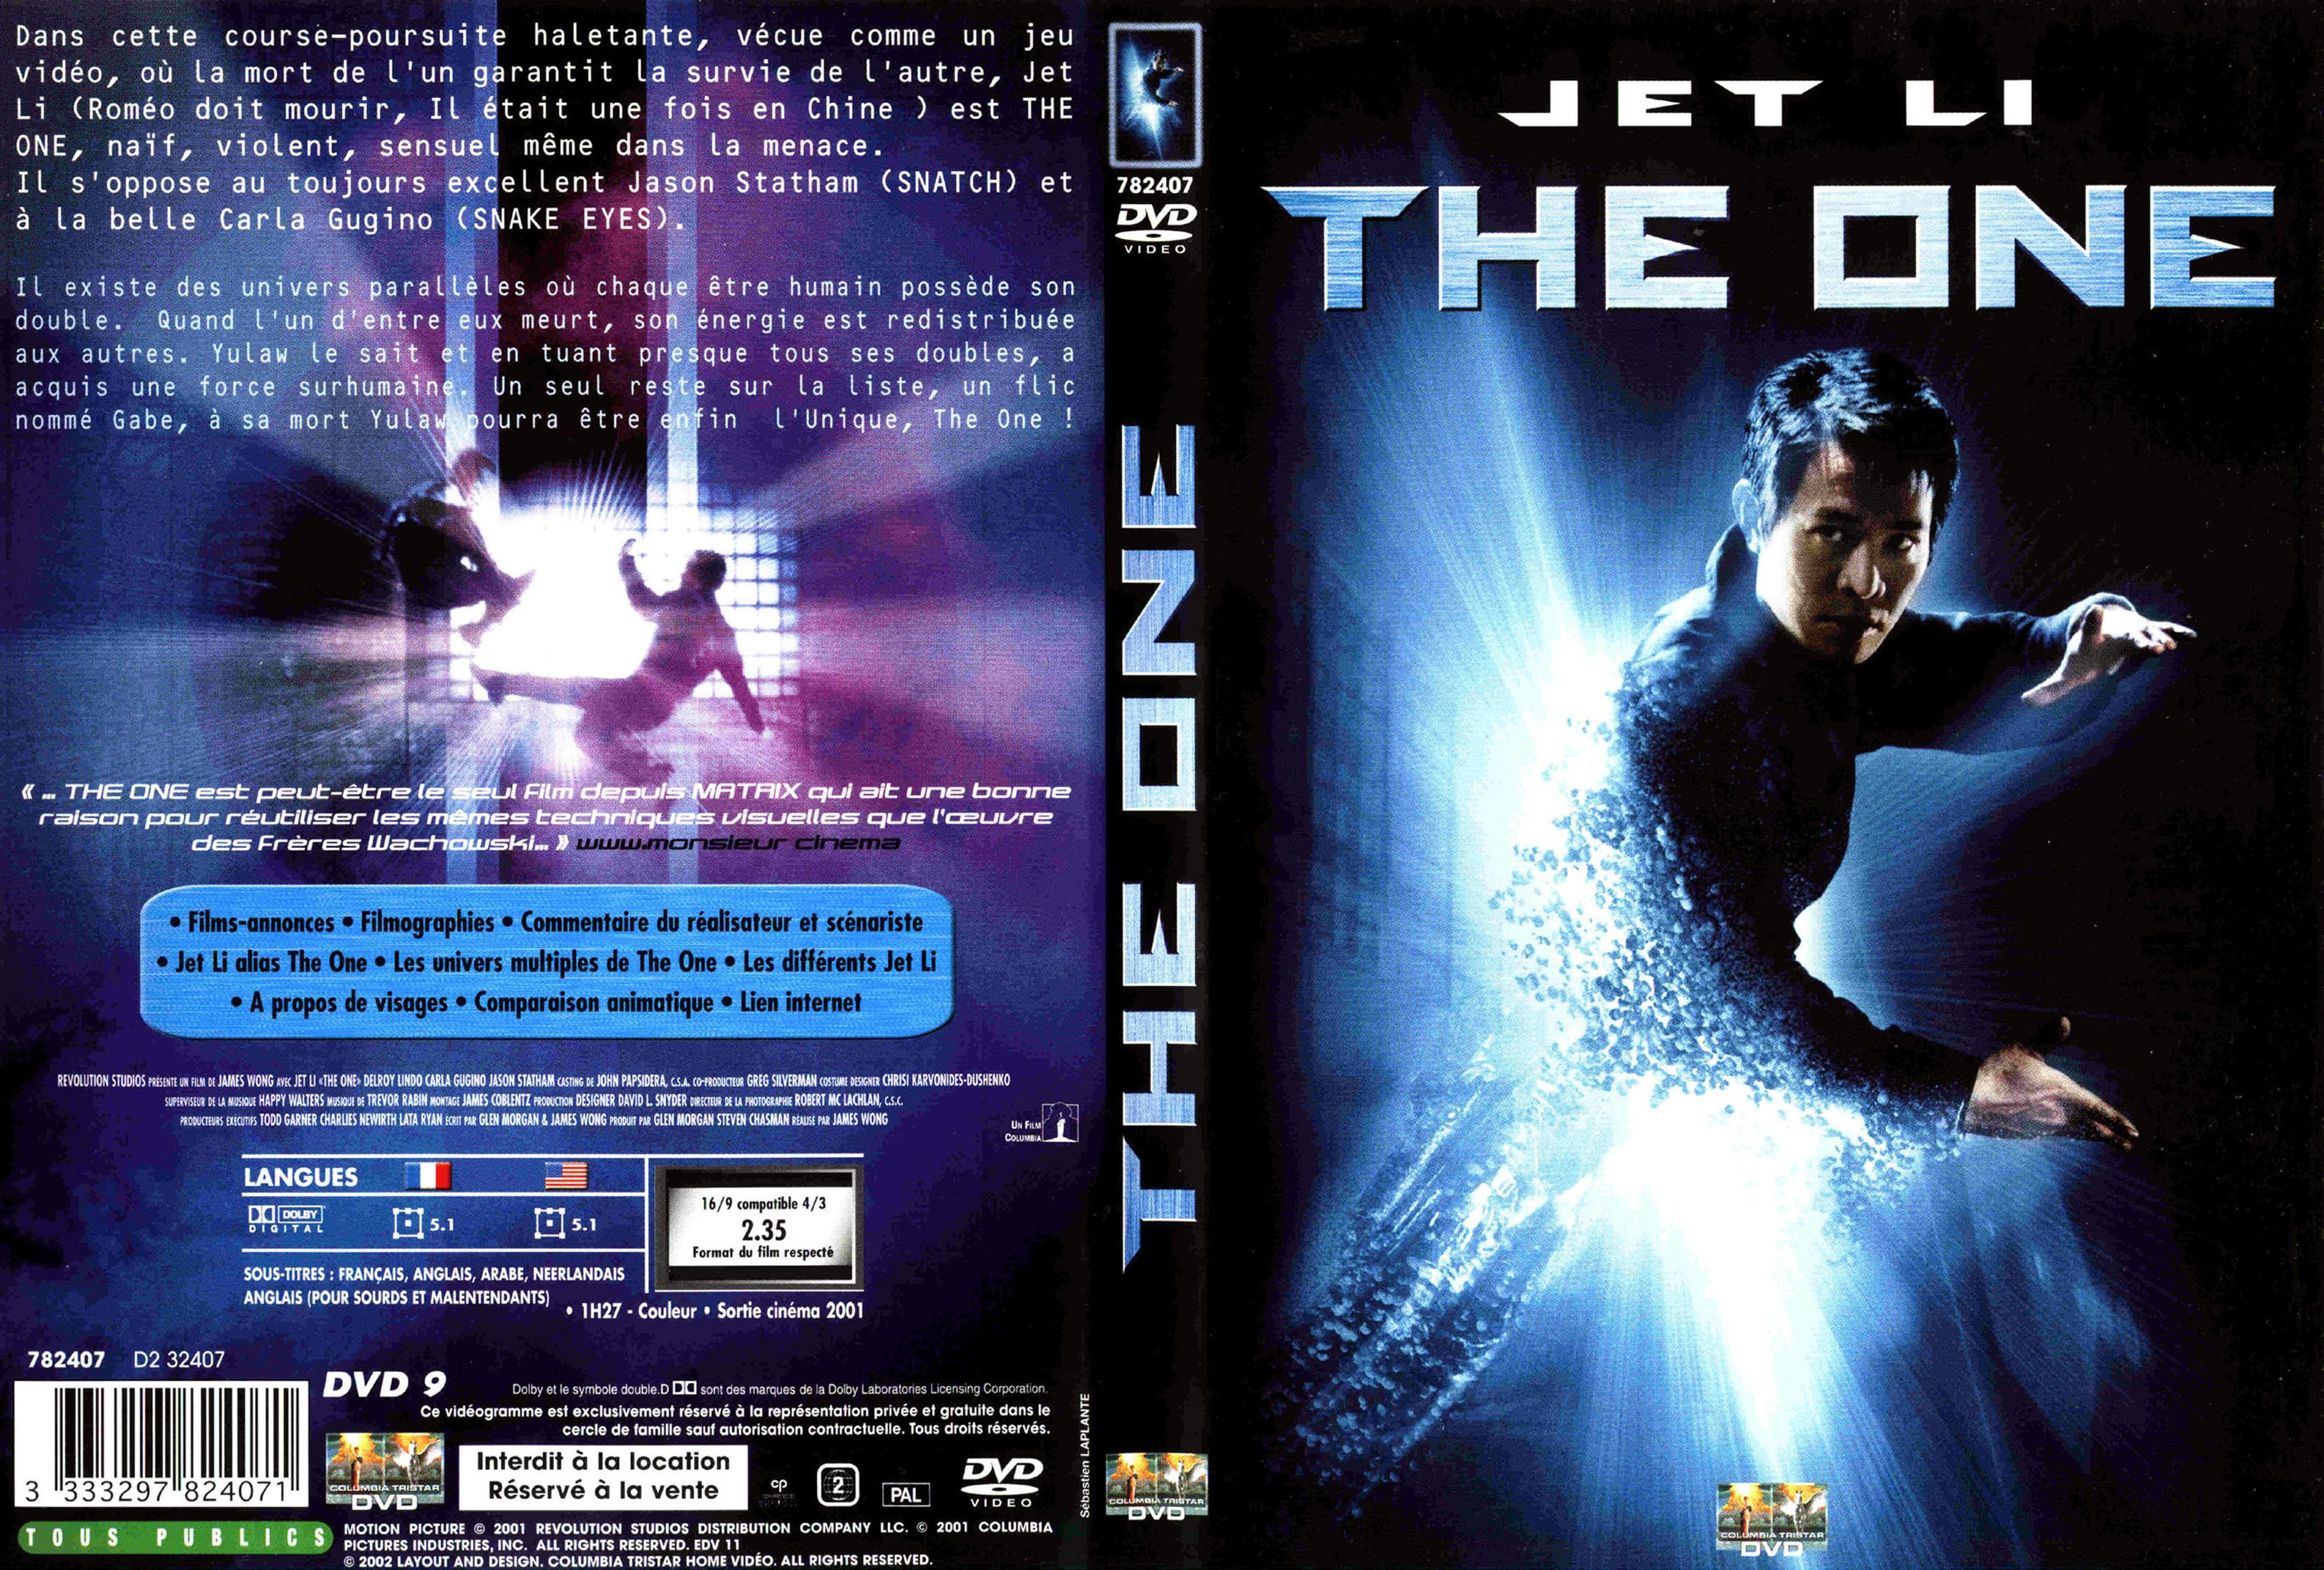 Jaquette DVD The one